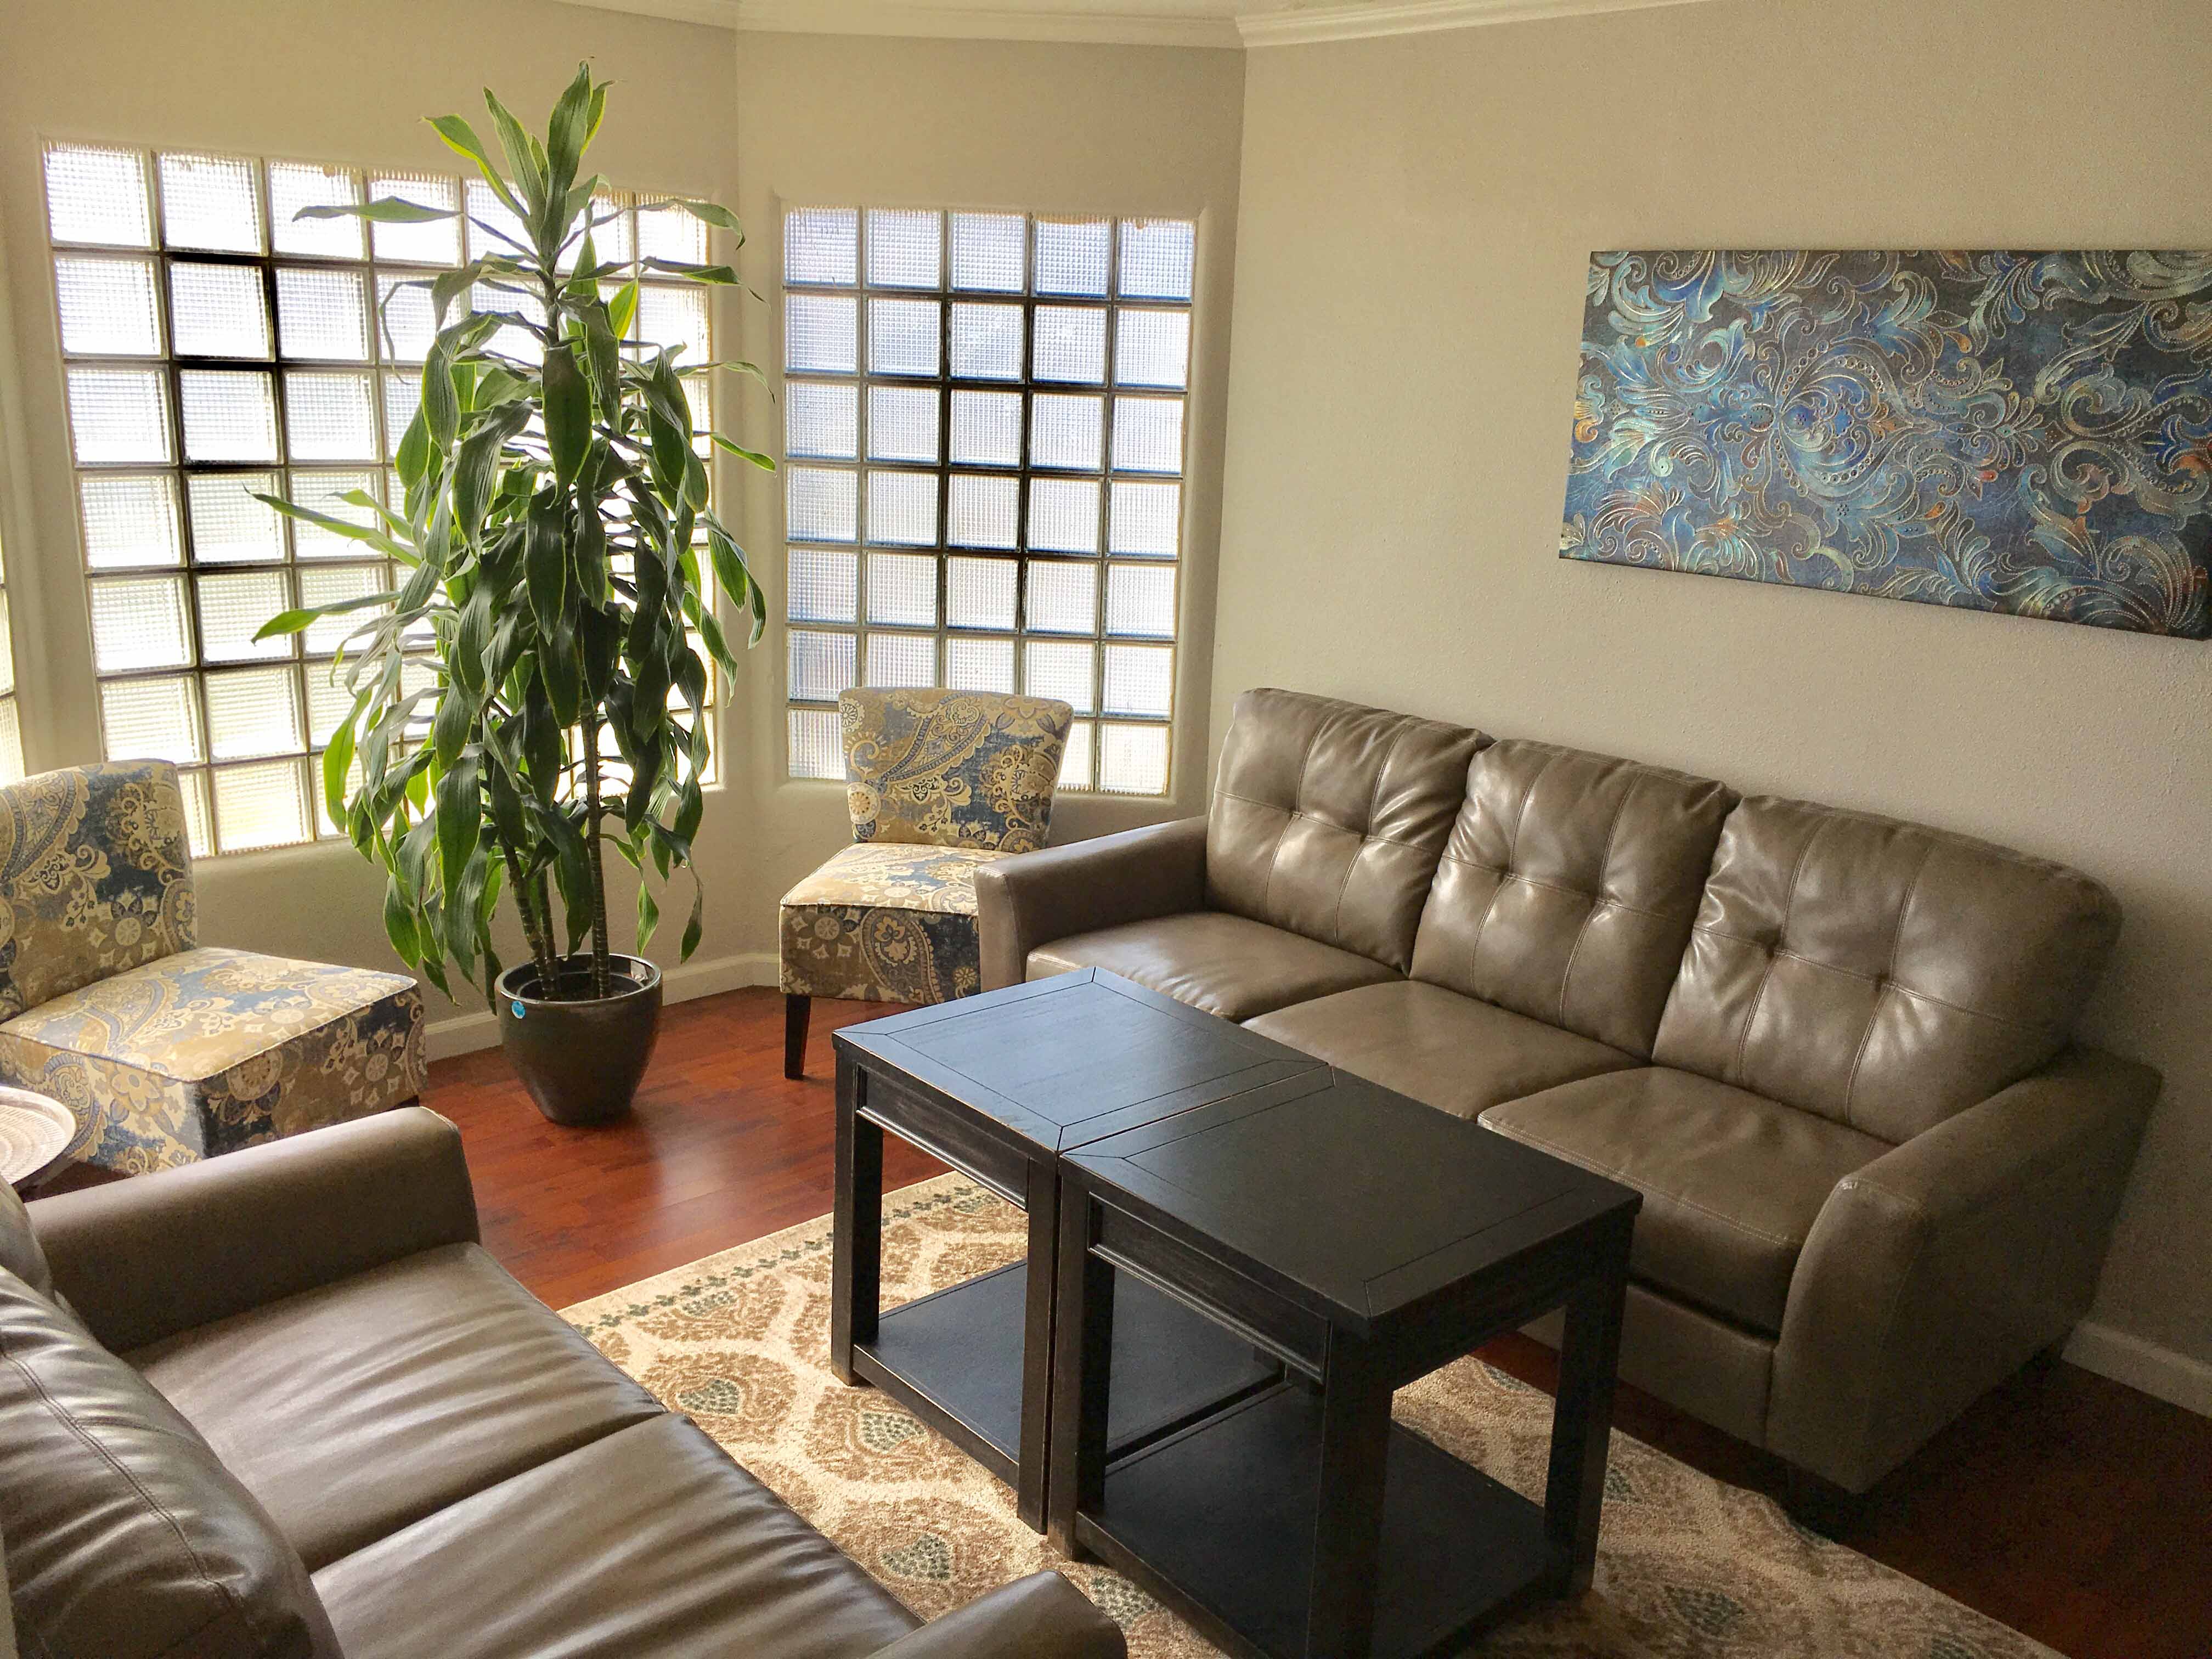 Couches with coffee table and indoor plant in front of windows